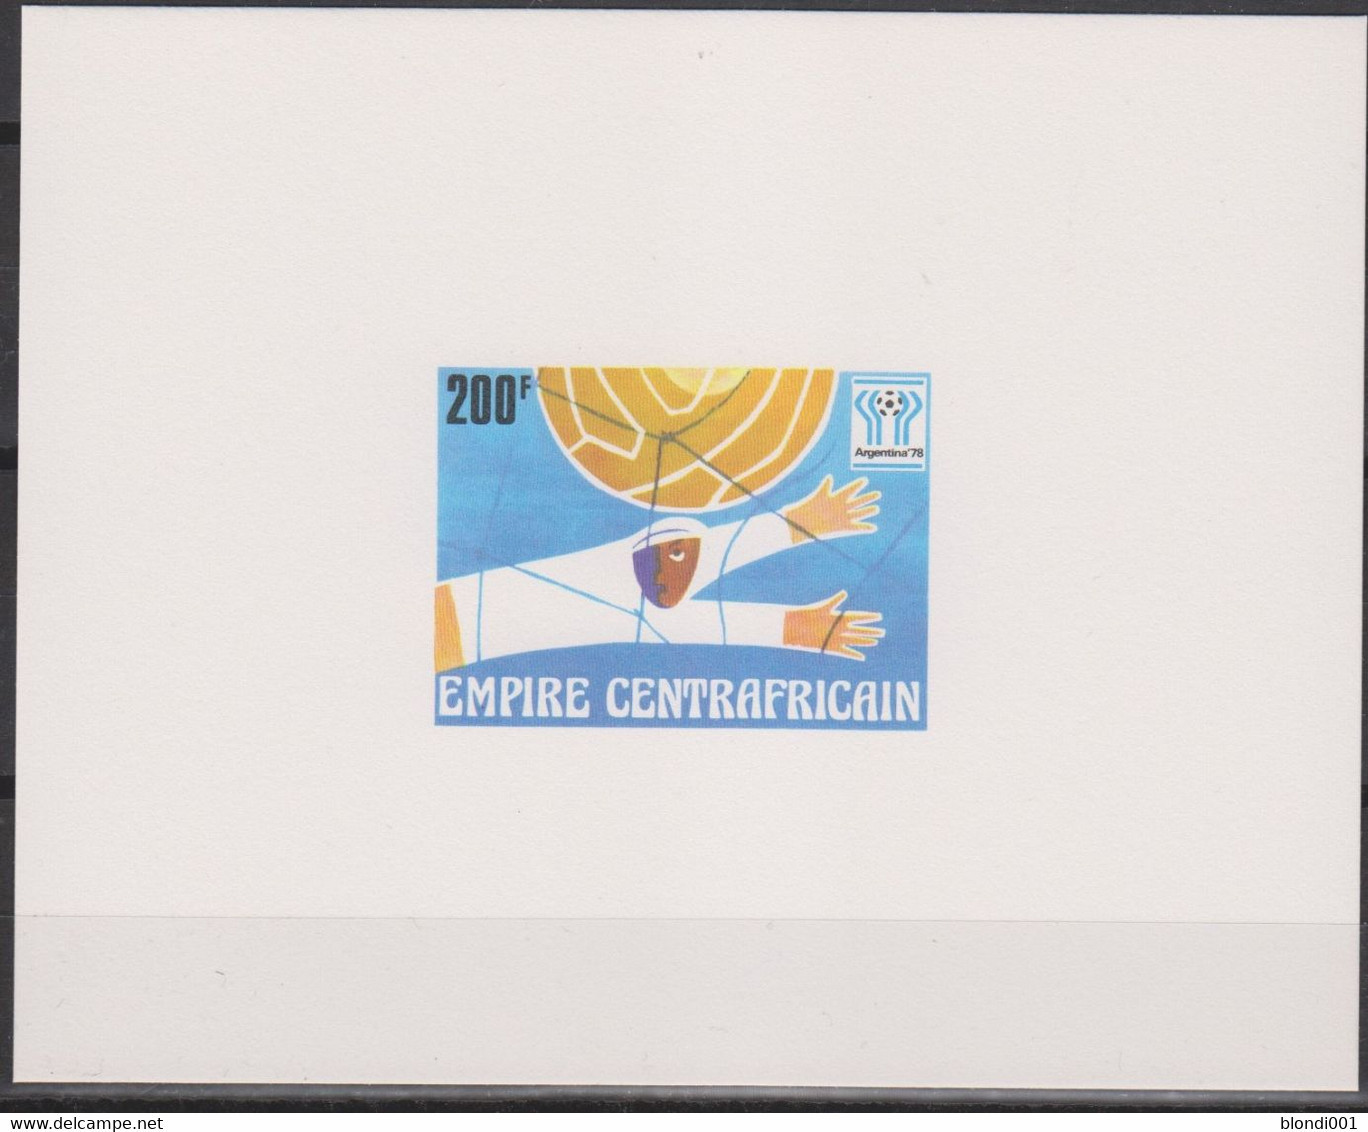 Soccer World Cup 1978 - Football - C.-AFRICA - S/S Luxus Carton MNH - 1978 – Argentine